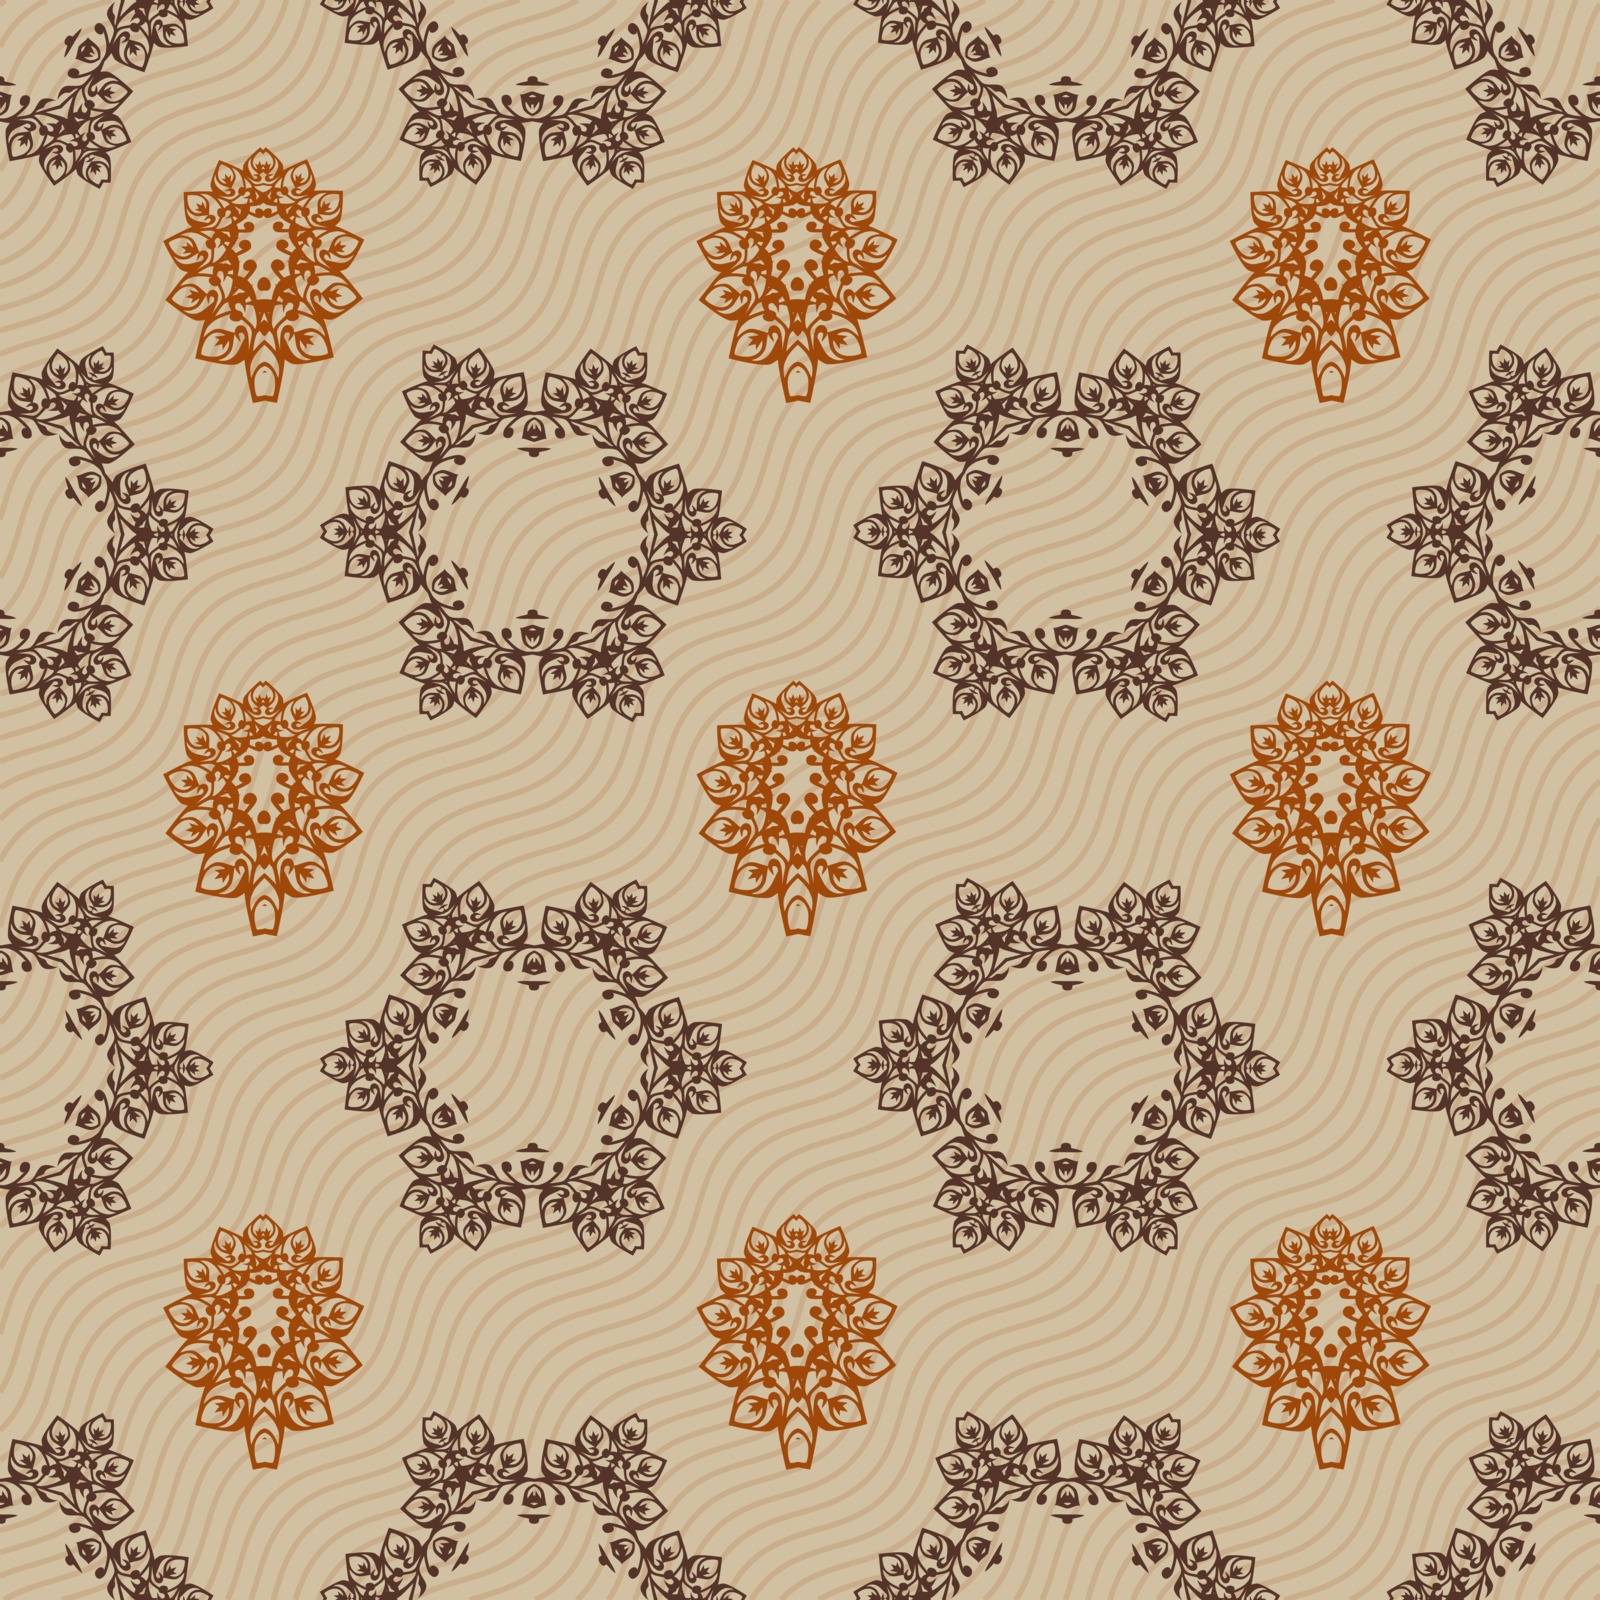 Seamless ornament pattern vector tile by stocklady